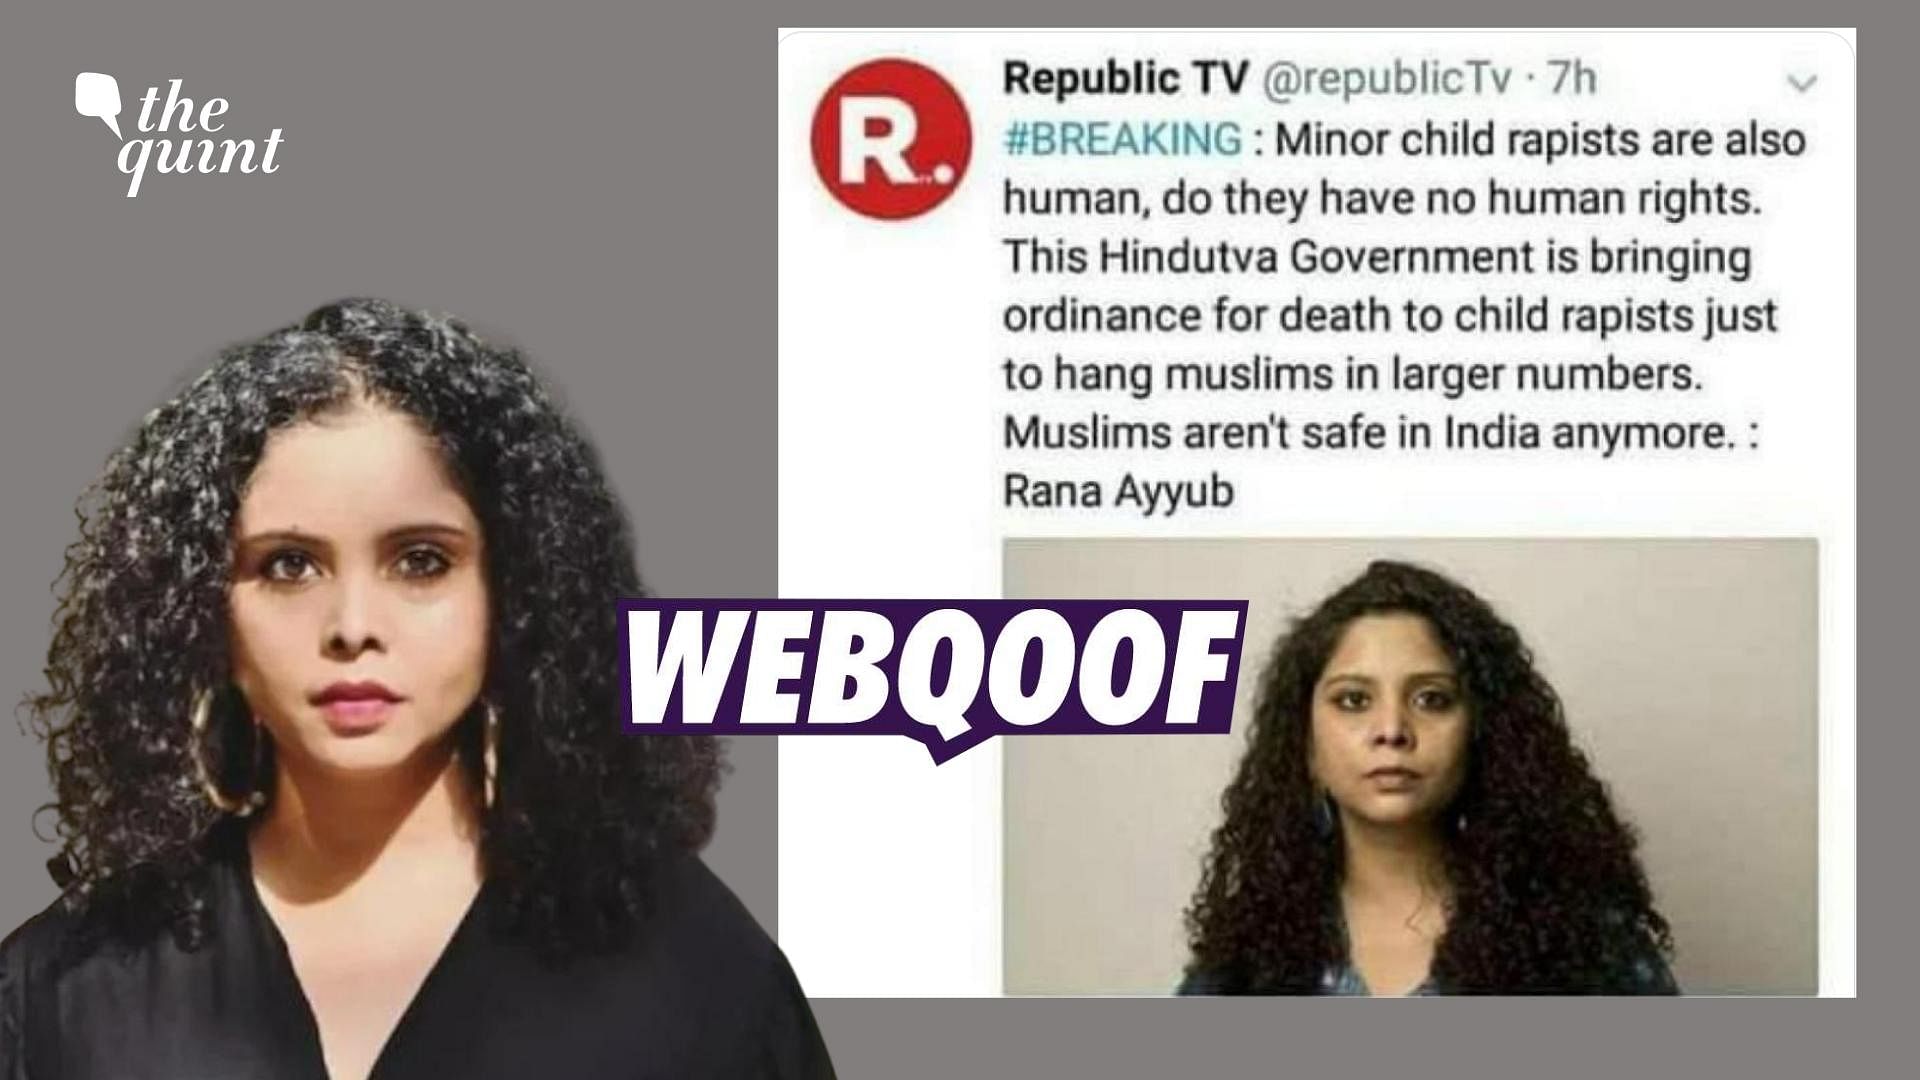 <div class="paragraphs"><p>The claim states that journalist Rana Ayyub defended child rapists.&nbsp;</p></div>